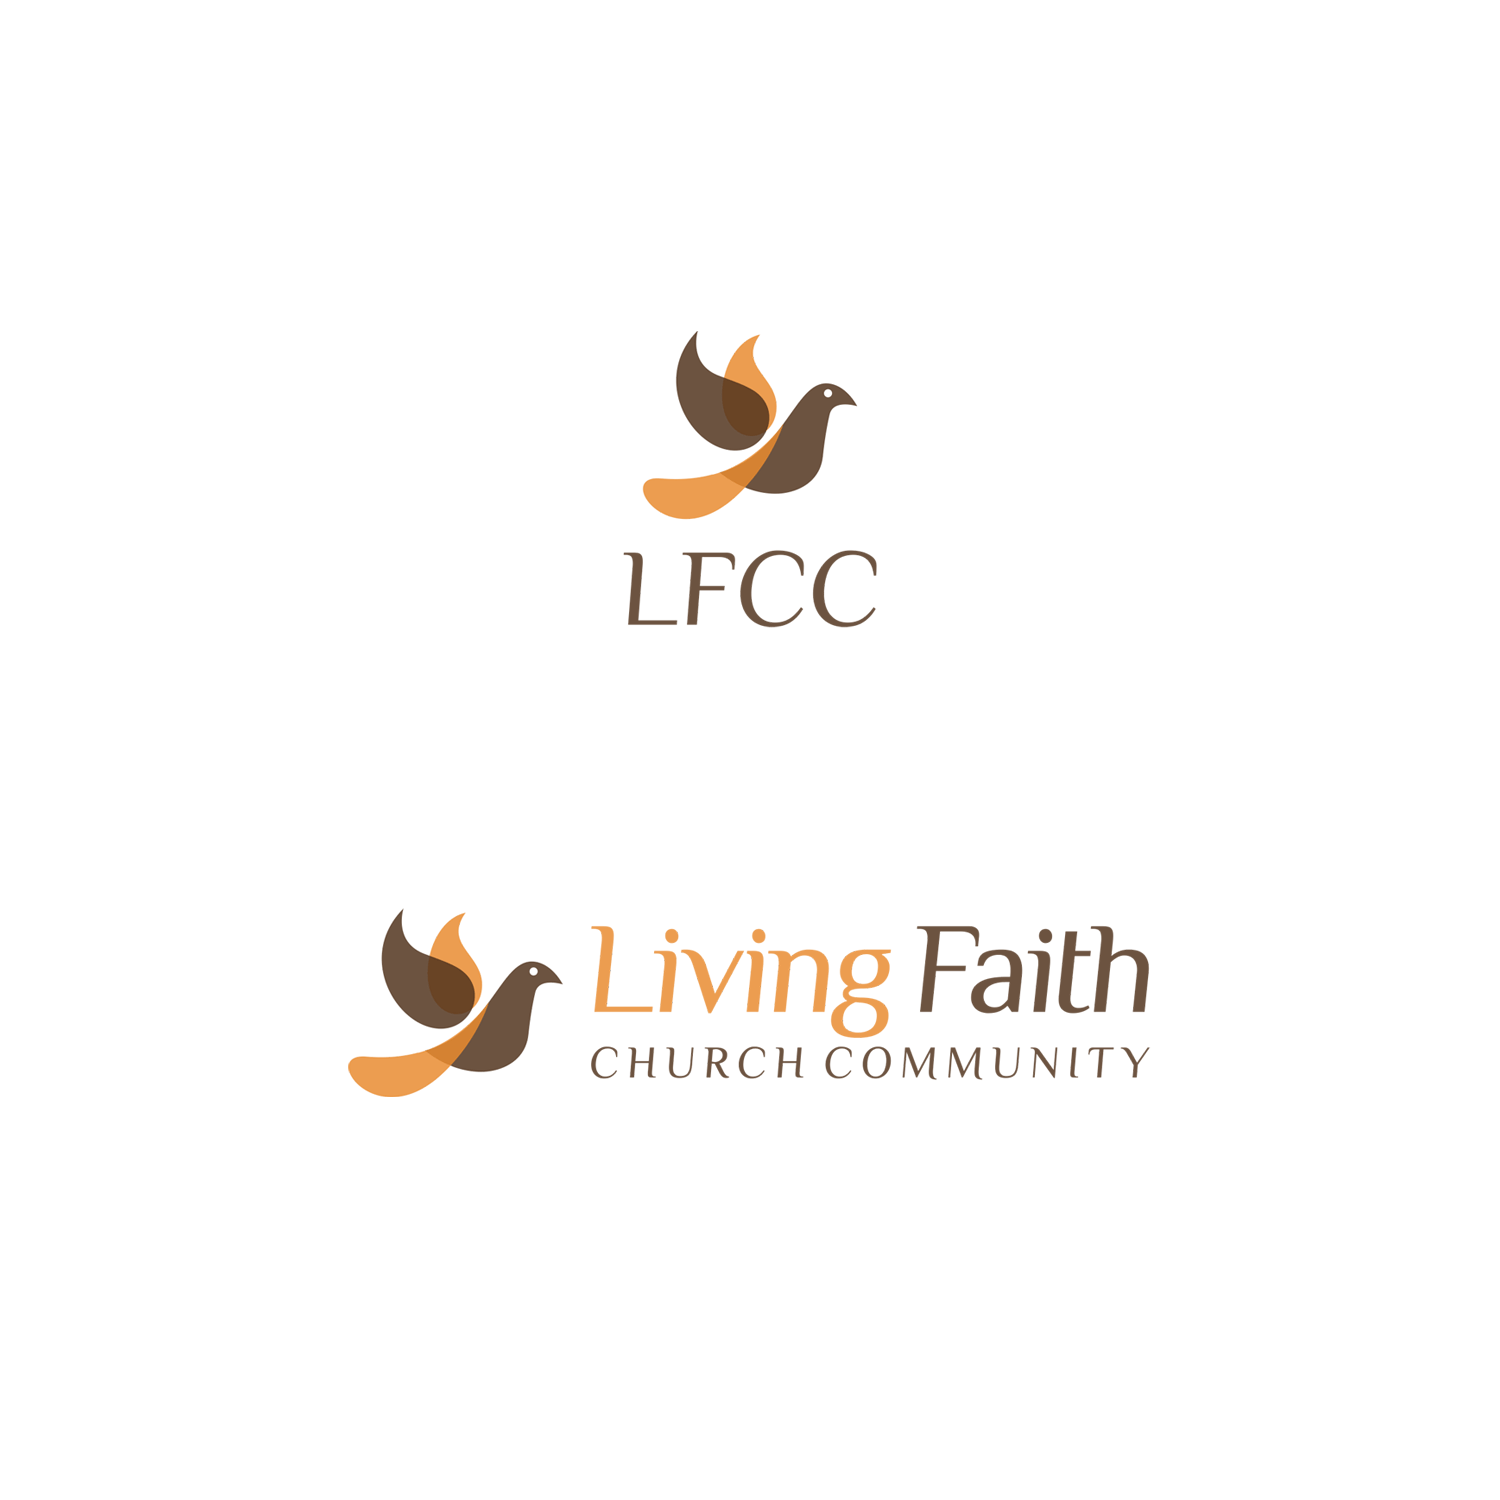 Brown Dove Logo - 49 Church Logos for Christian Apps and Organizations